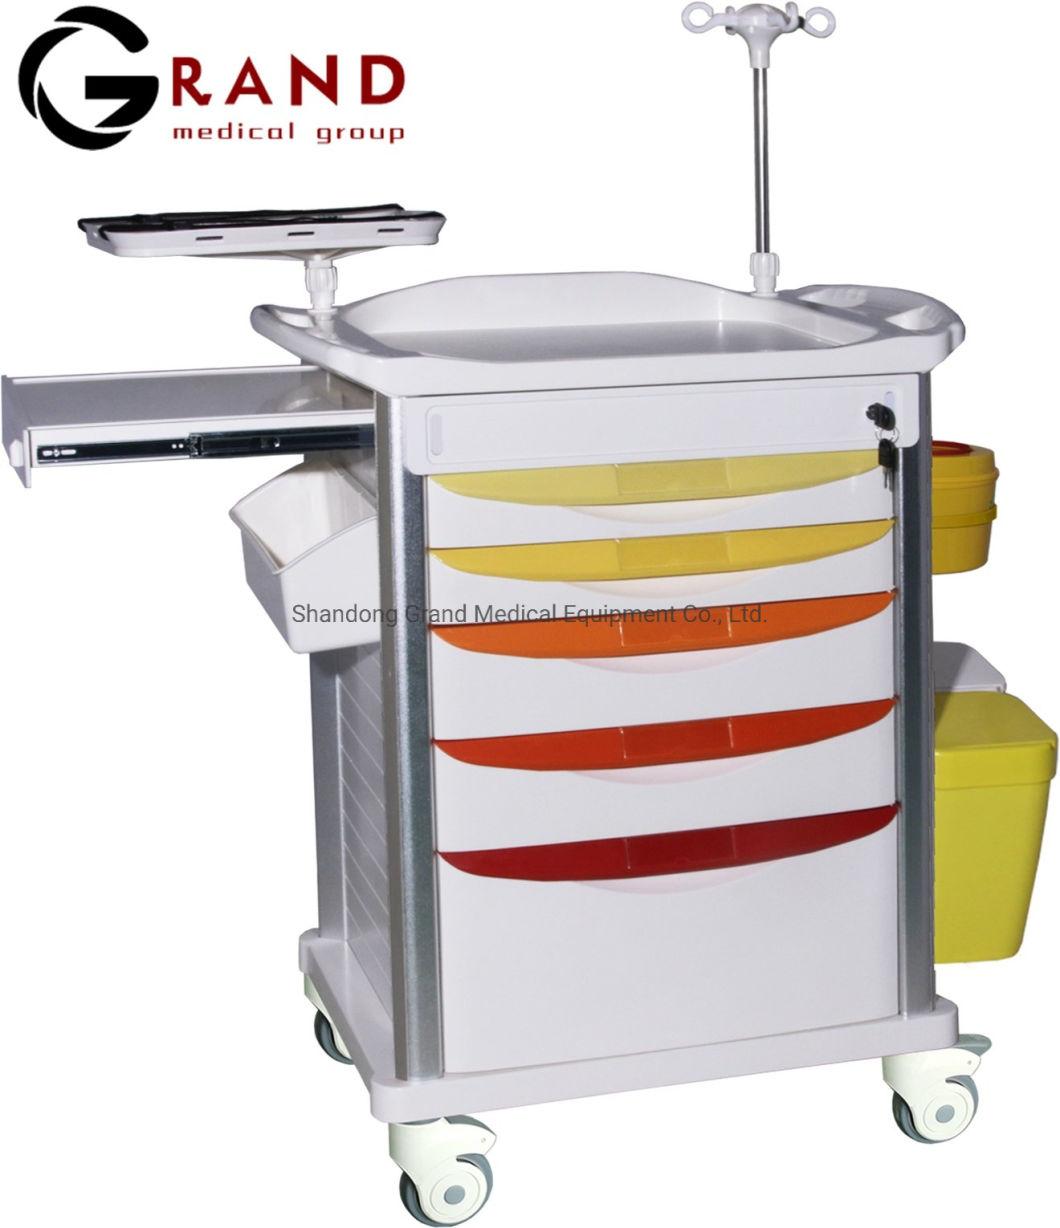 Medical Emergency ABS Clinical Medicine Treatment Cart Hospital Economic Treatment Trolley with Drawers Wheels